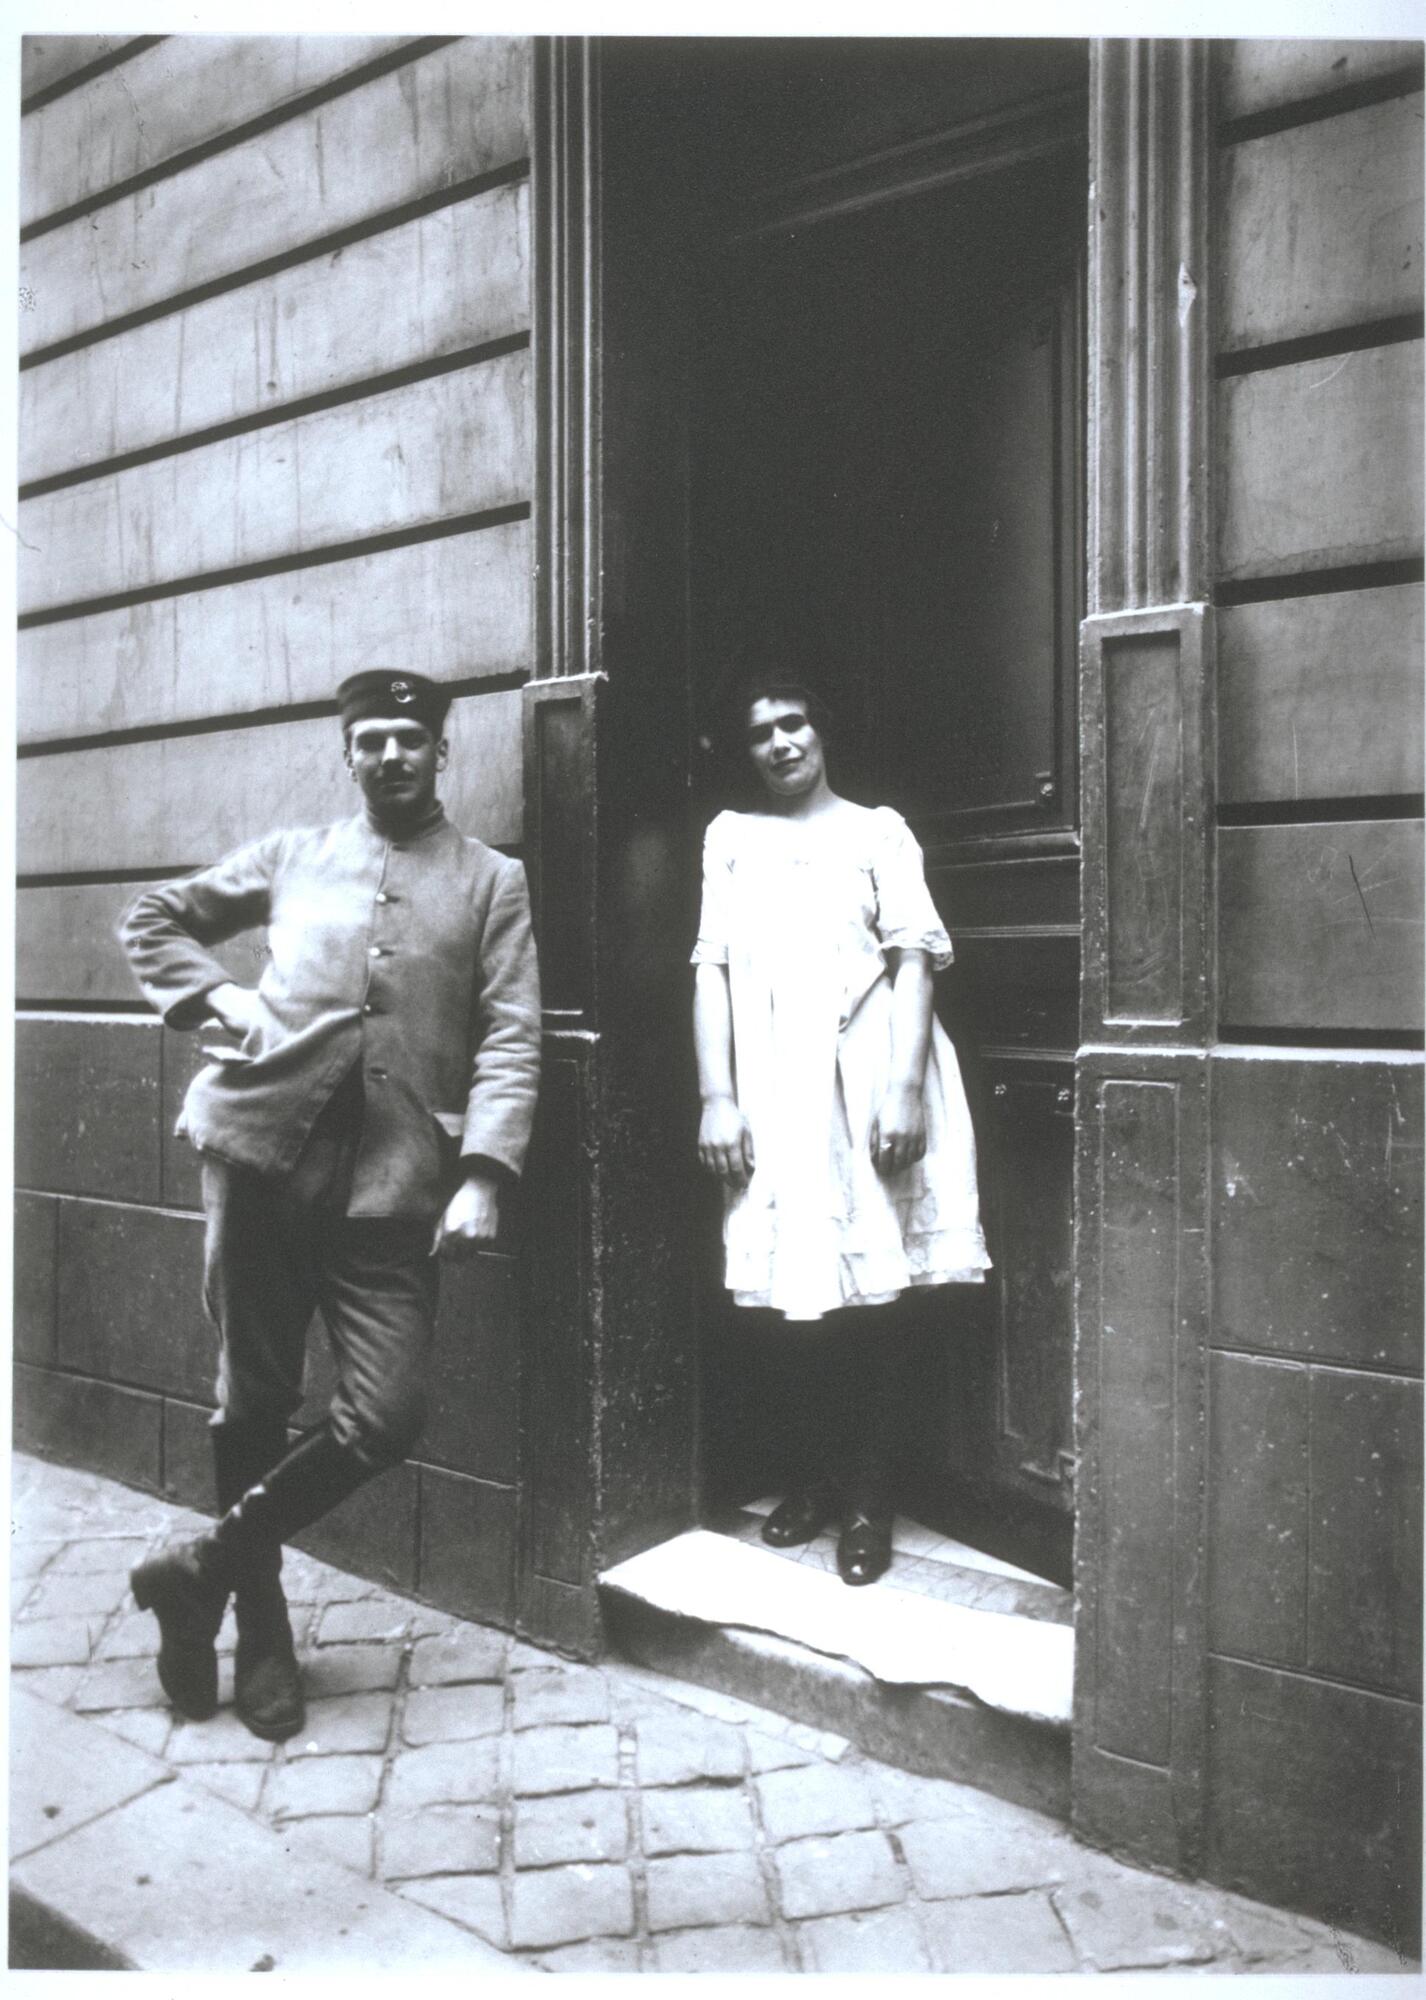 A woman in a doorway and a soldier leaning on the exterior wall next to her.